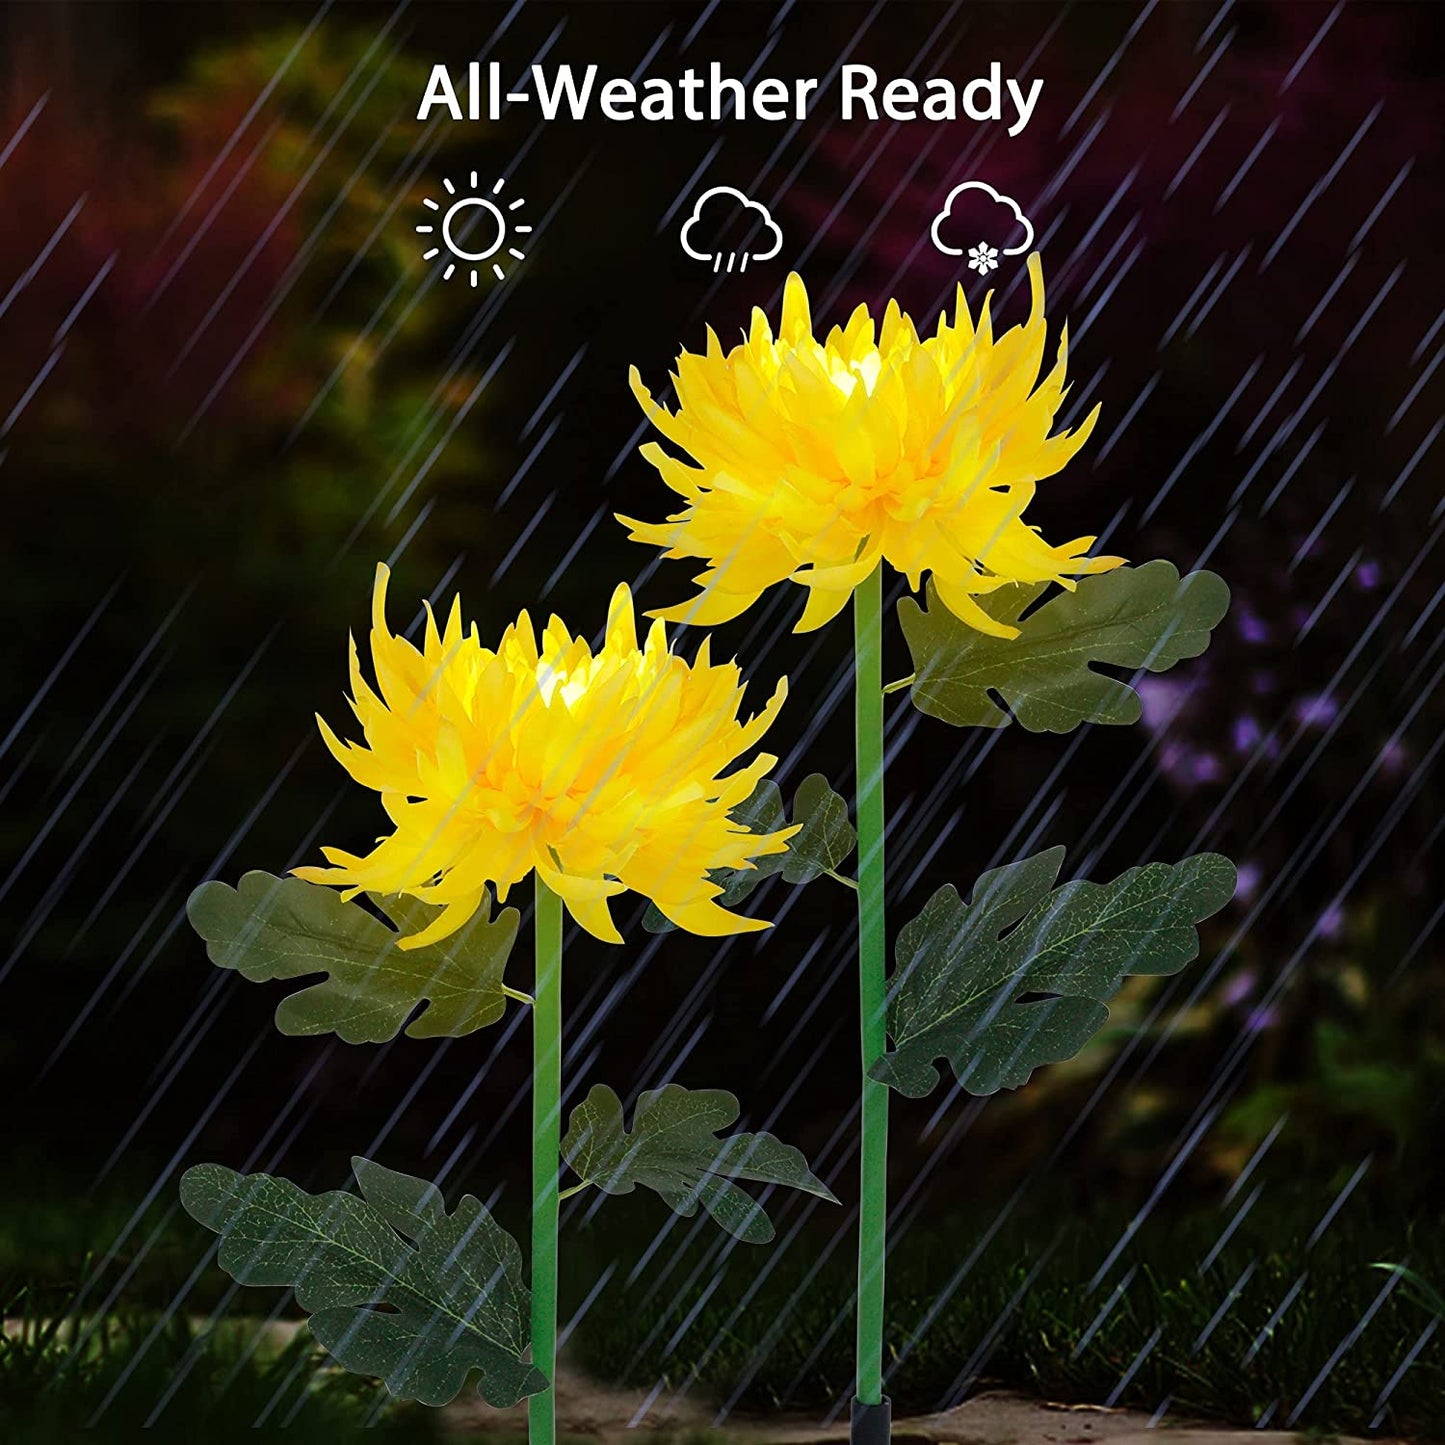  2 Pack Solar Garden Stake Lights, Outdoor Chrysanthemum Lights, LED Solar Powered Lights for Patio Lawn Garden Yard Pathway Decoration, Yellow